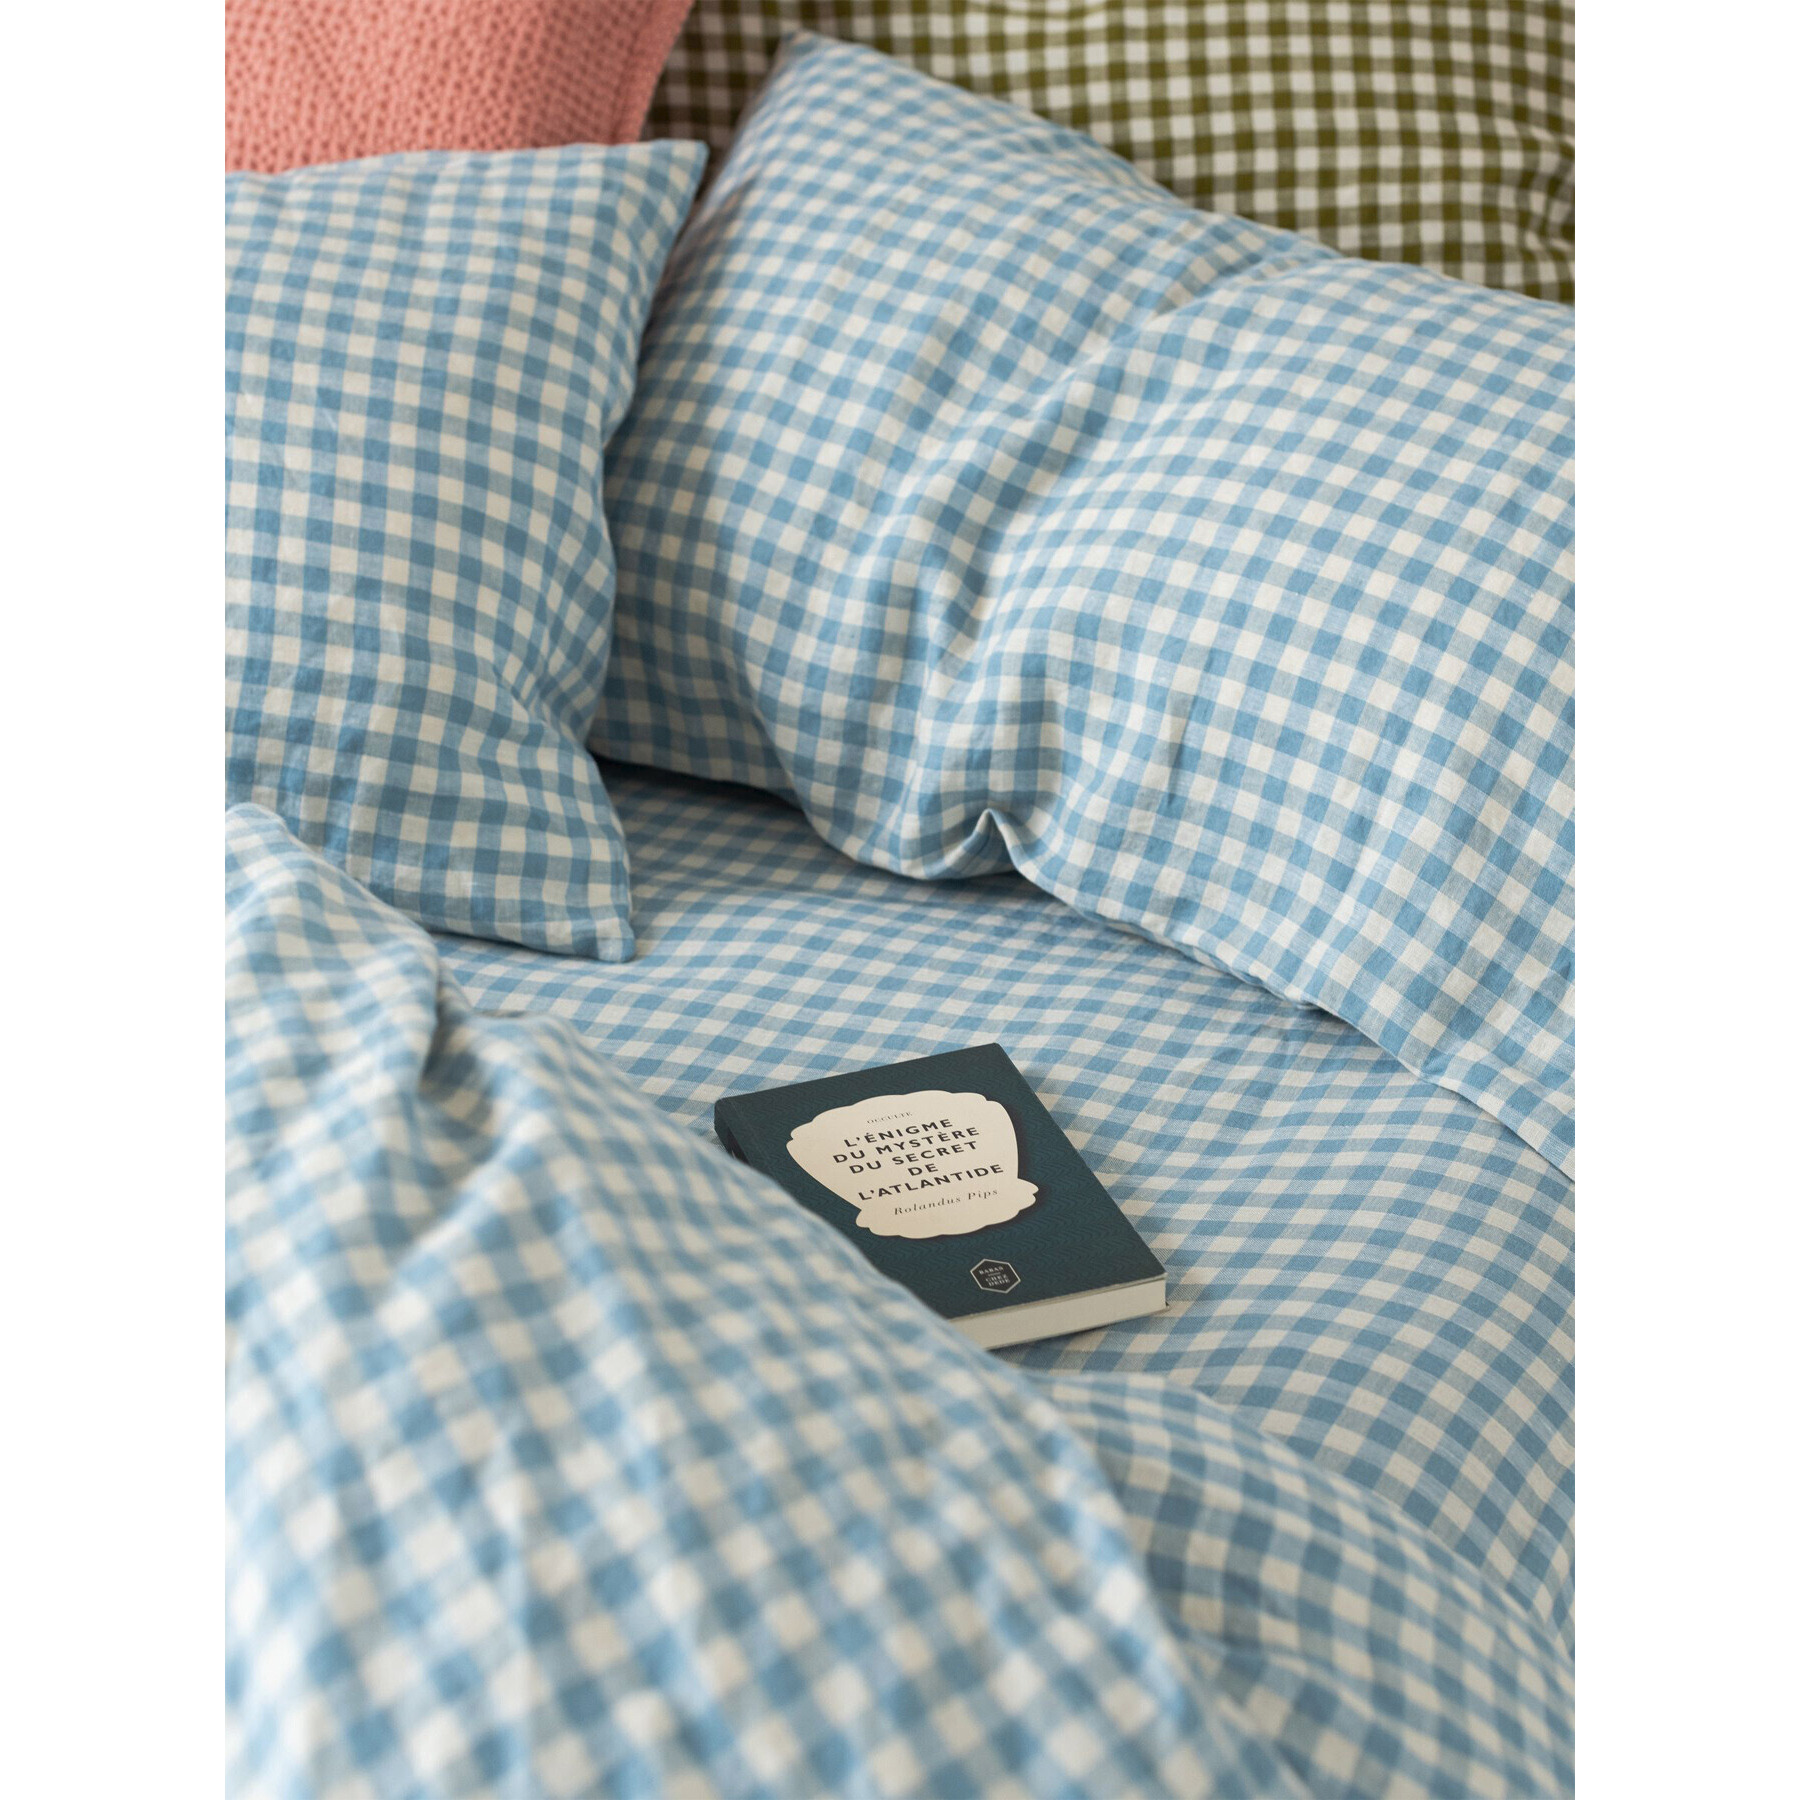 Piglet in Bed Gingham Linen Pillowcases (pair) - Size Square Blue - image 1